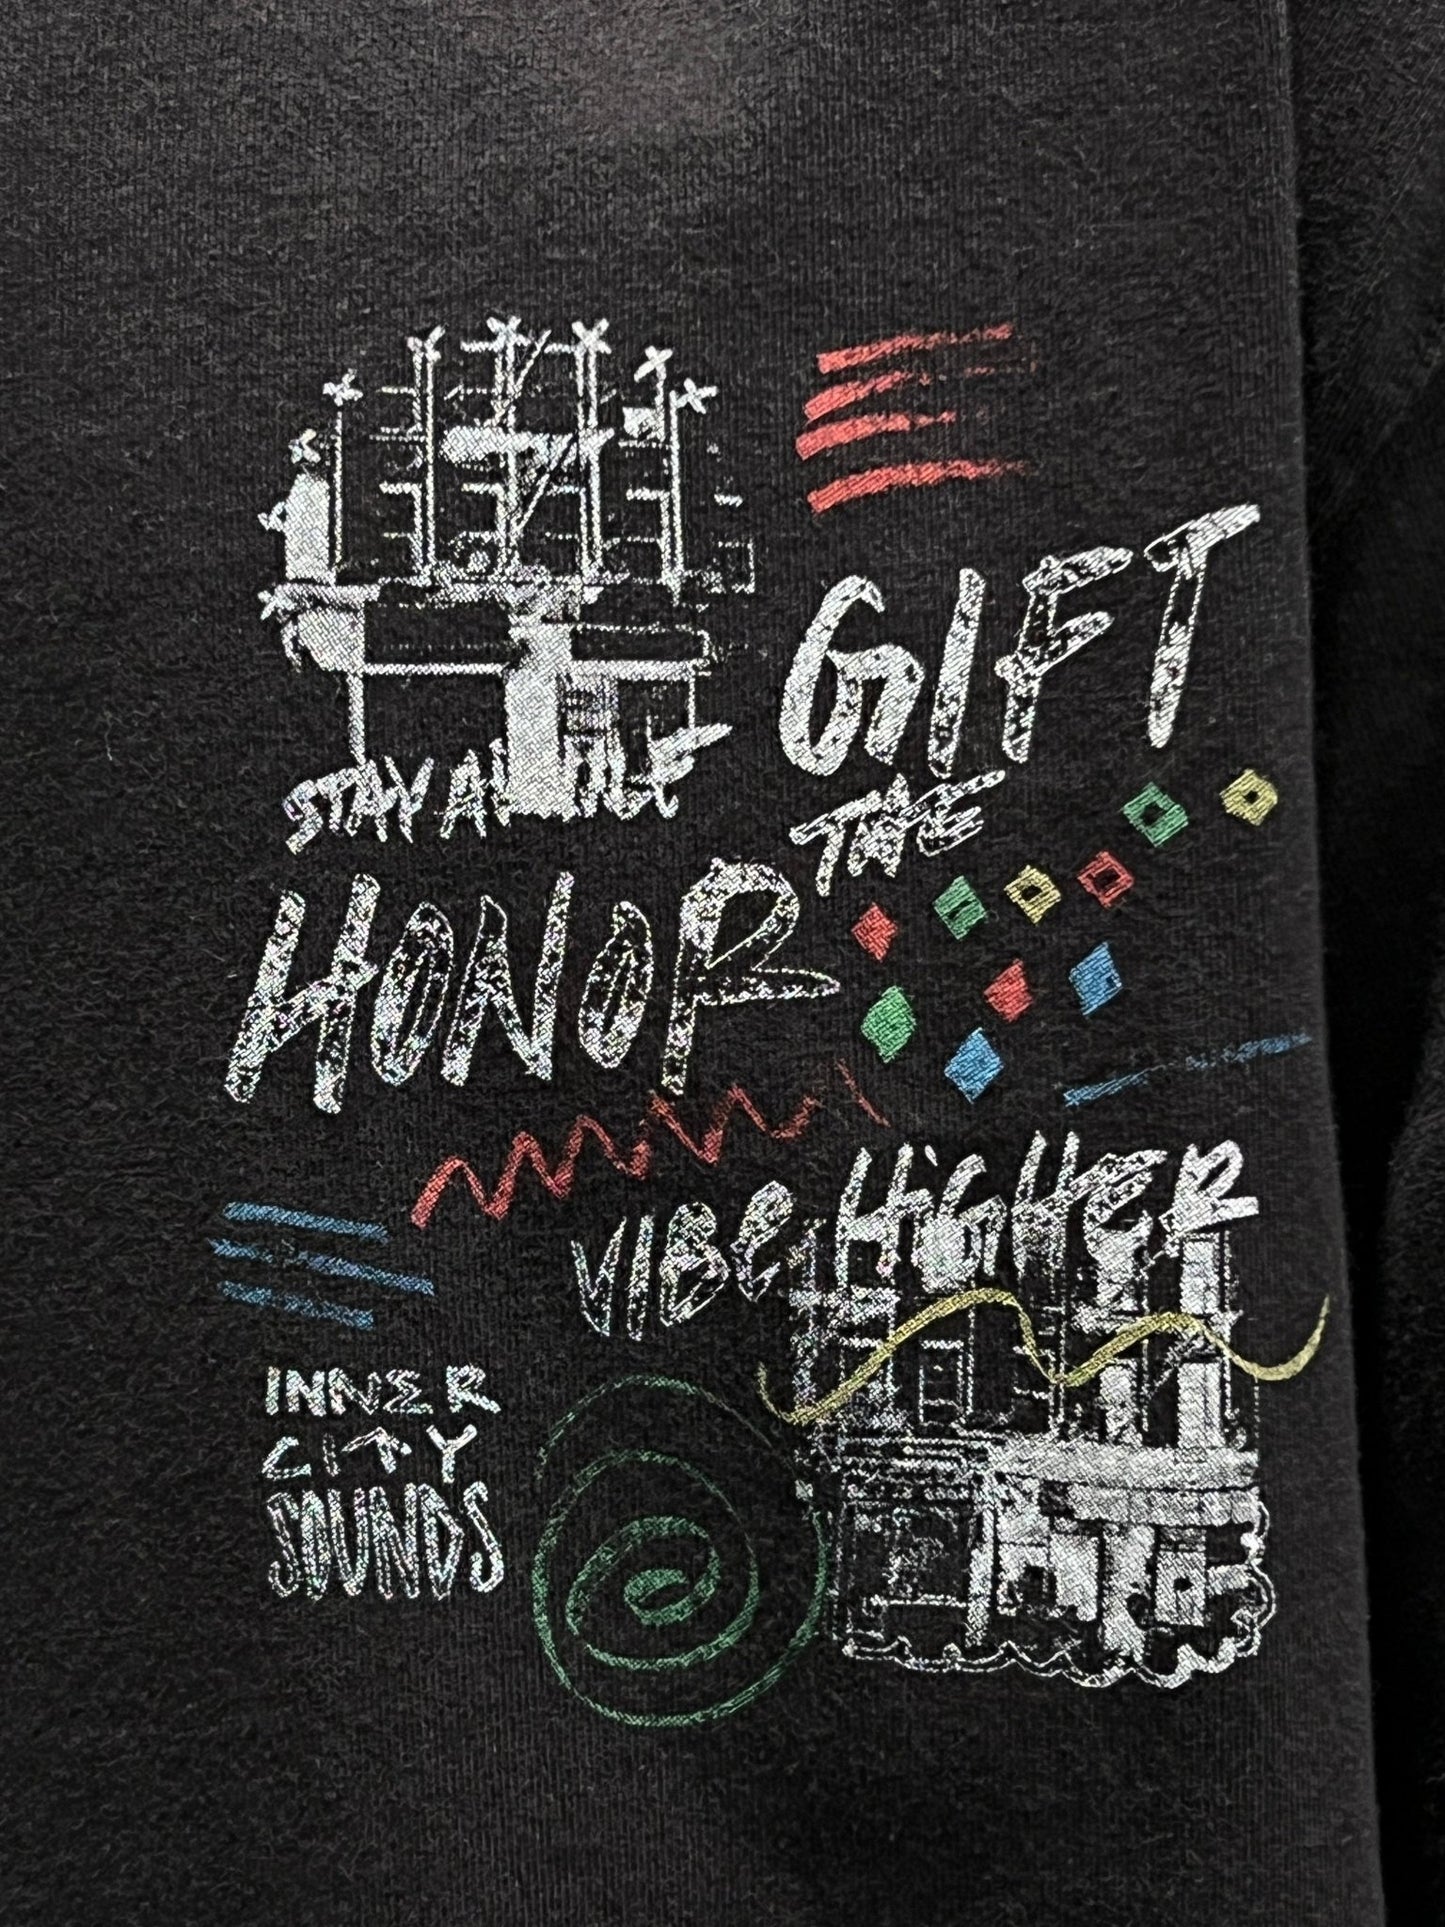 Probus HONOR THE GIFT A-SPRING PANEL HTG VIBE HIGHER SS TEE BLACK HONOR THE GIFT A-SPRING PANEL HTG VIBE HIGHER SS TEE BLACK S